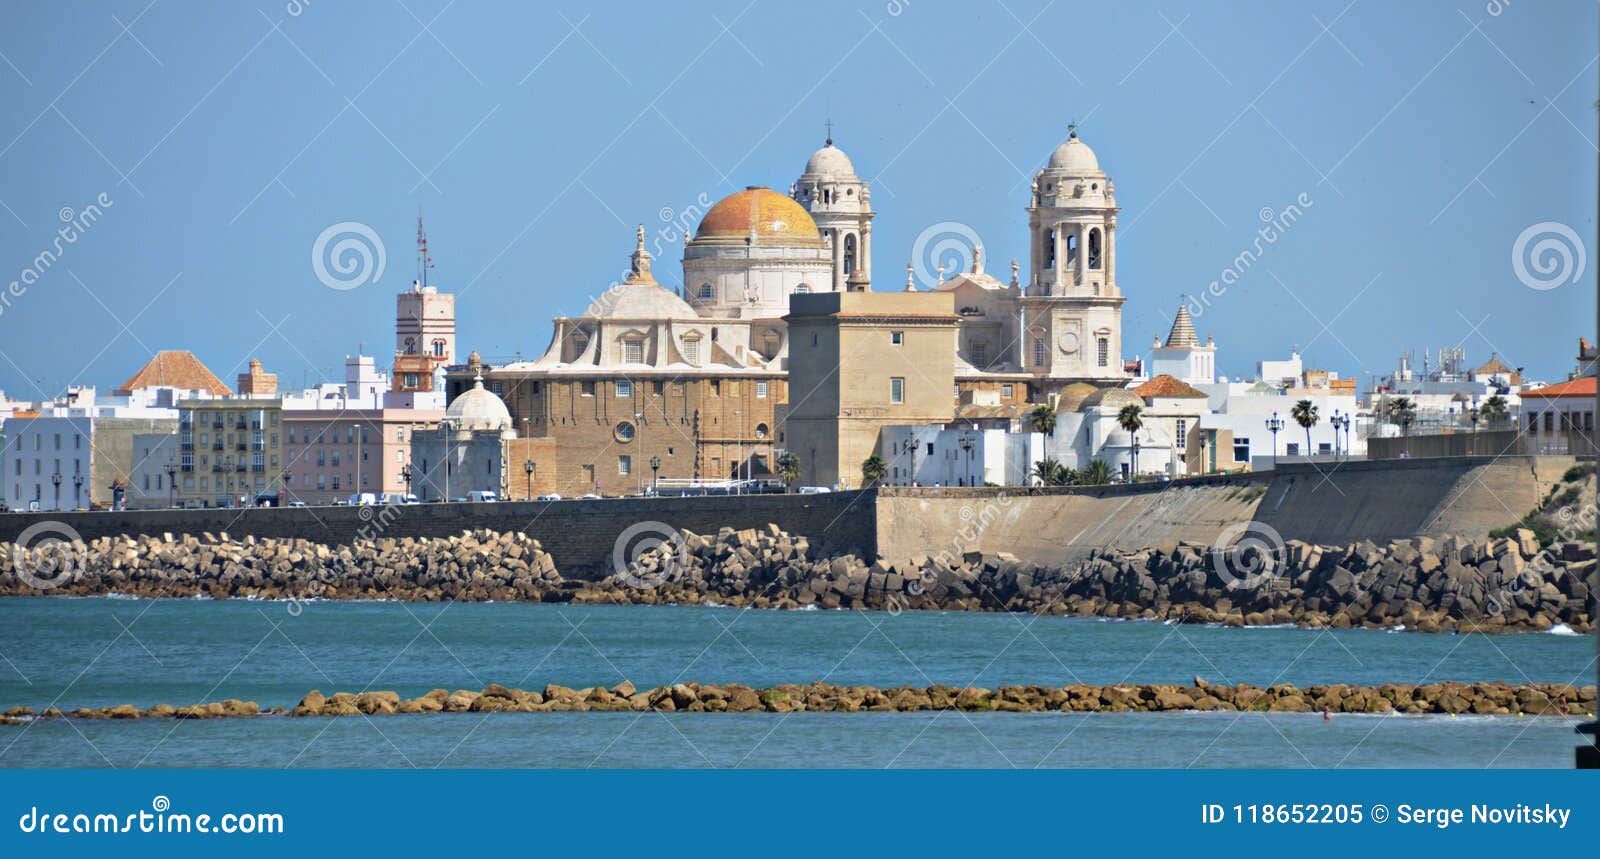 cadiz cathedral view from the water. spain.